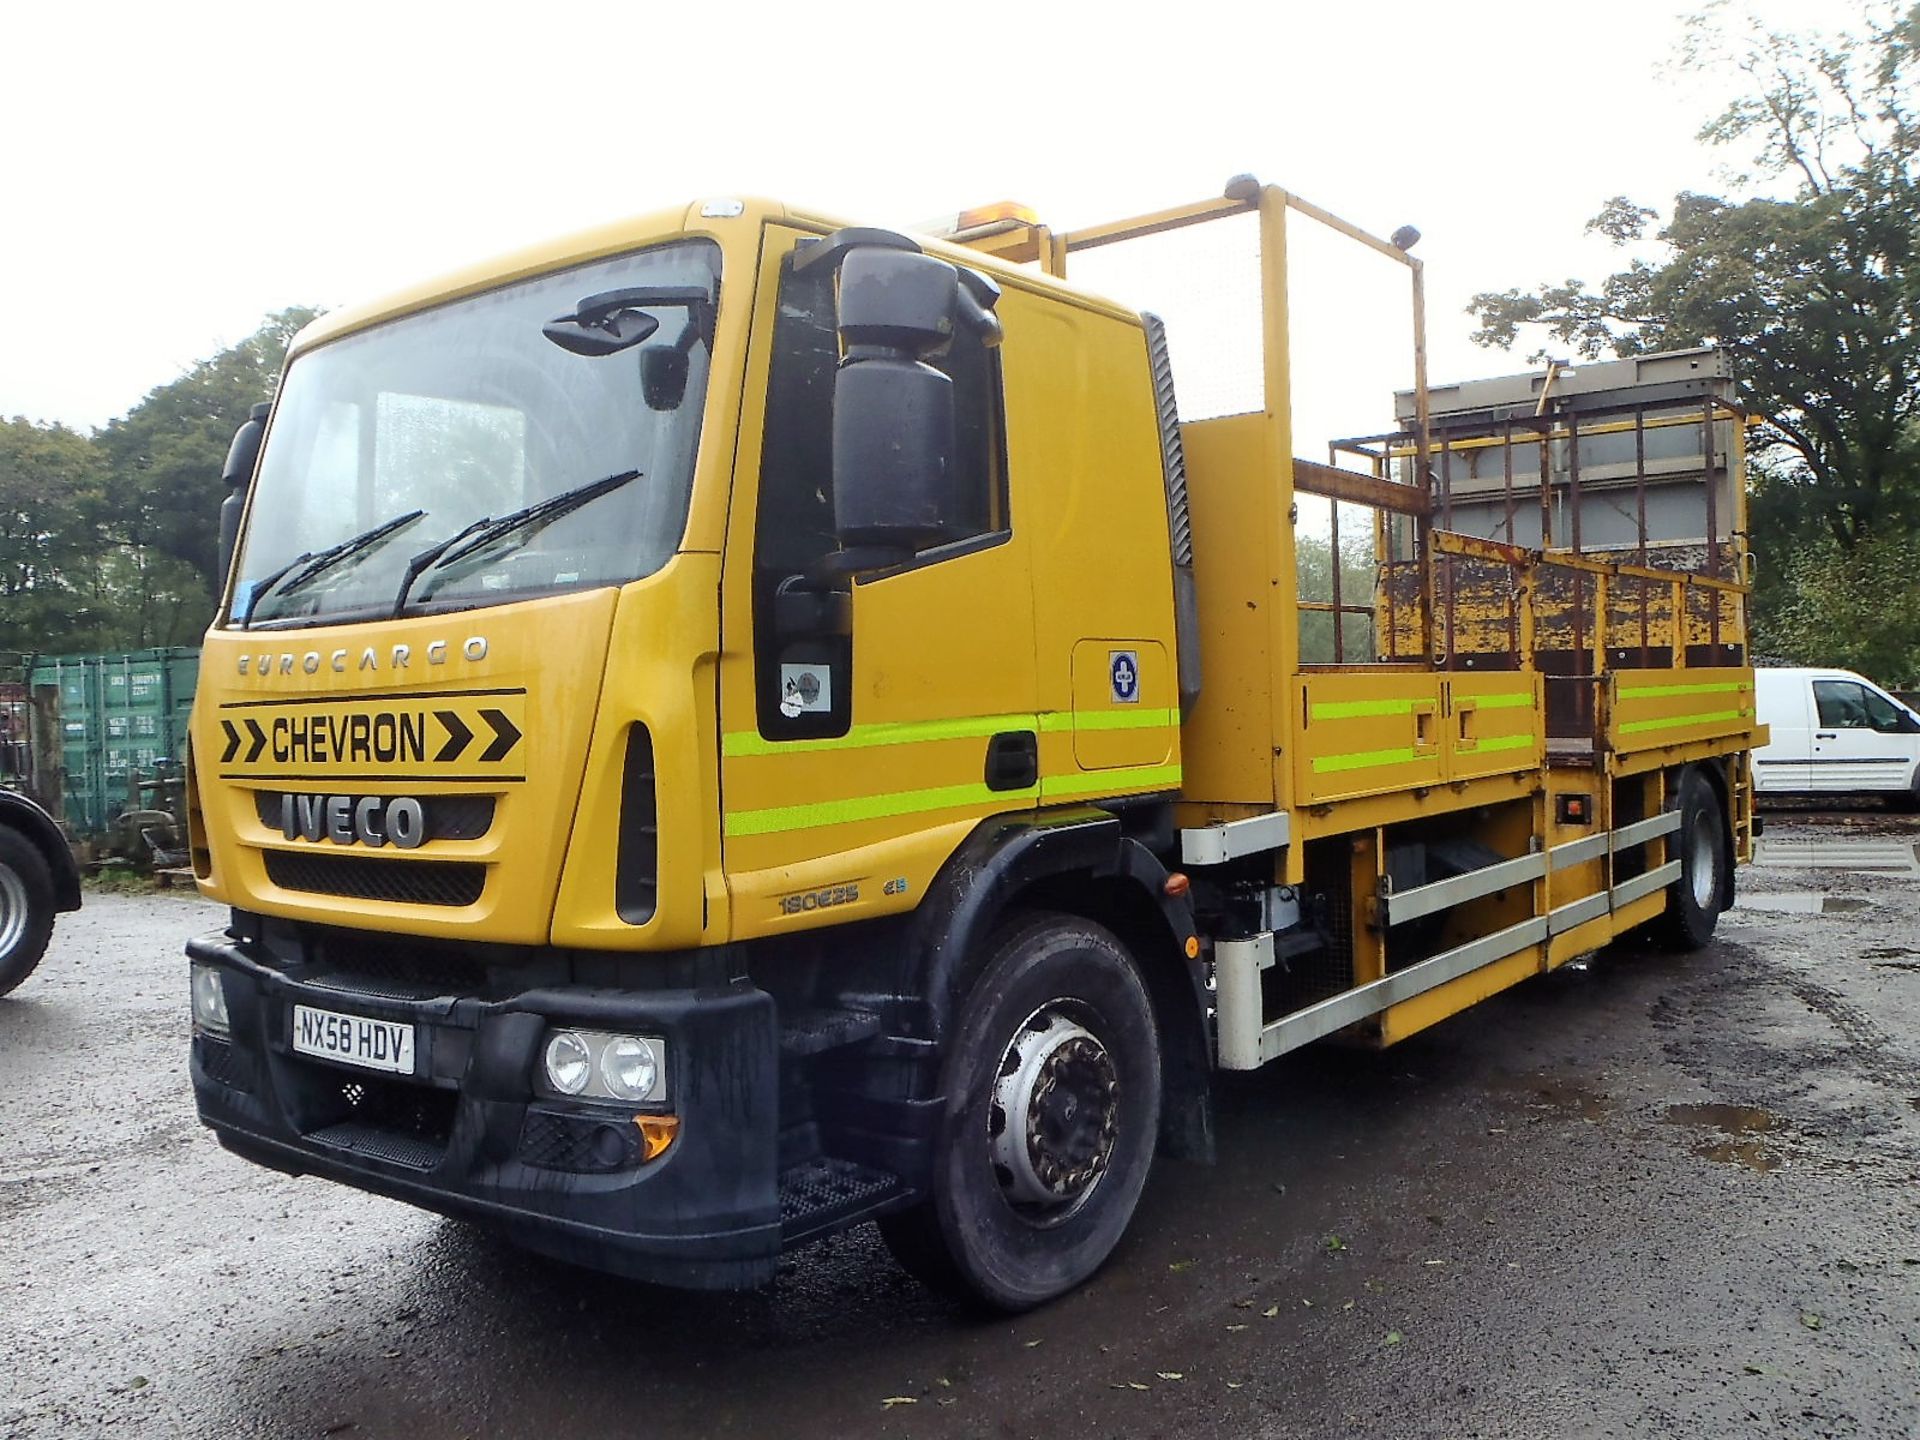 Iveco Eurocargo 18E25 18 tonne flat bed lorry Registration Number: NX58 HDV Date of Registration: - Image 2 of 7